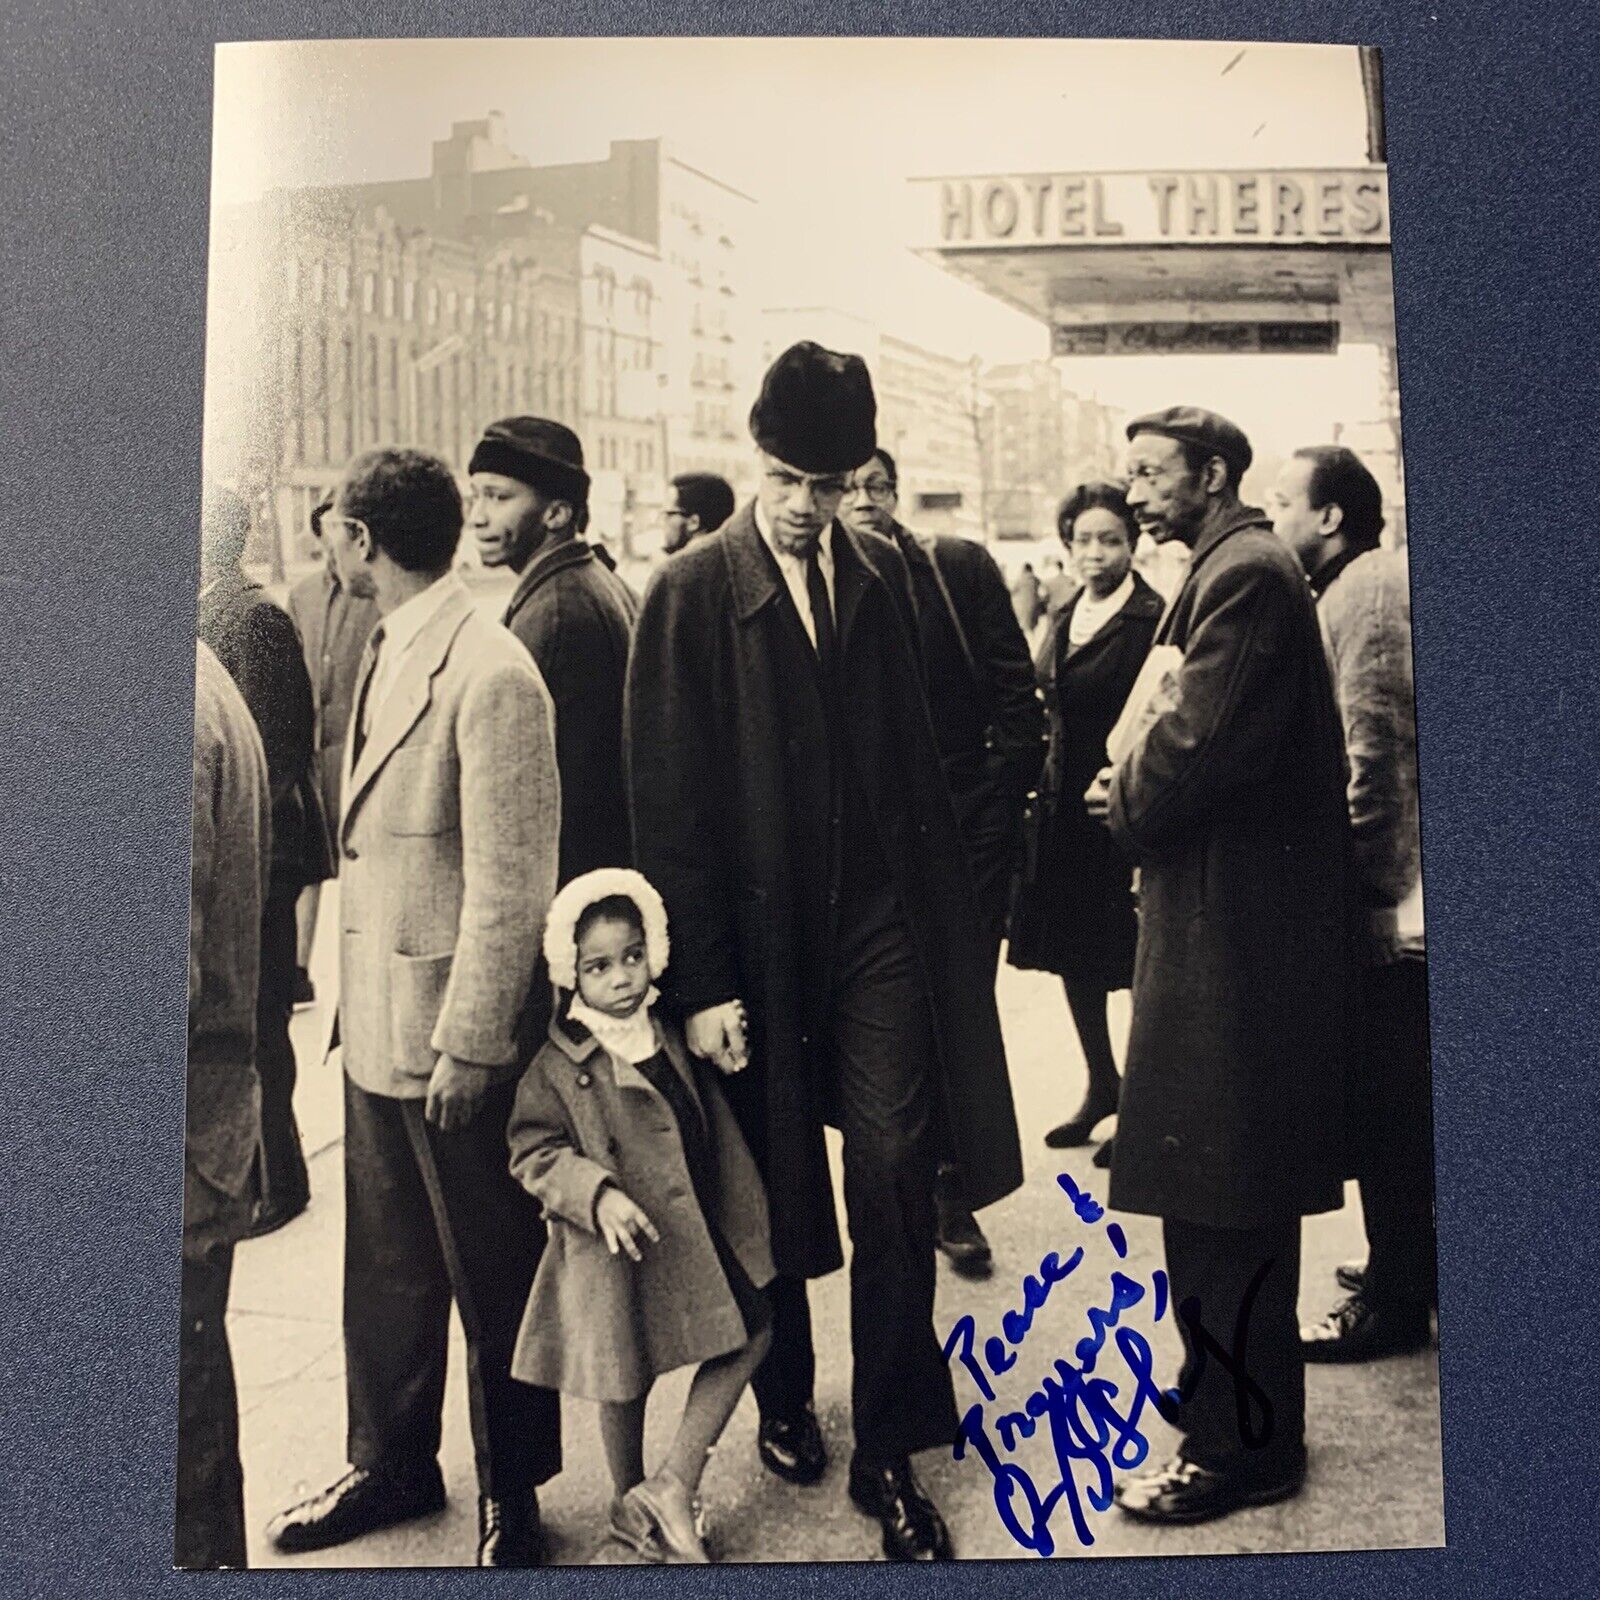 QUBILAH SHABAZZ HAND SIGNED 8x10 Photo Poster painting AUTOGRAPHED MALCOLM X DAUGHTER RARE COA